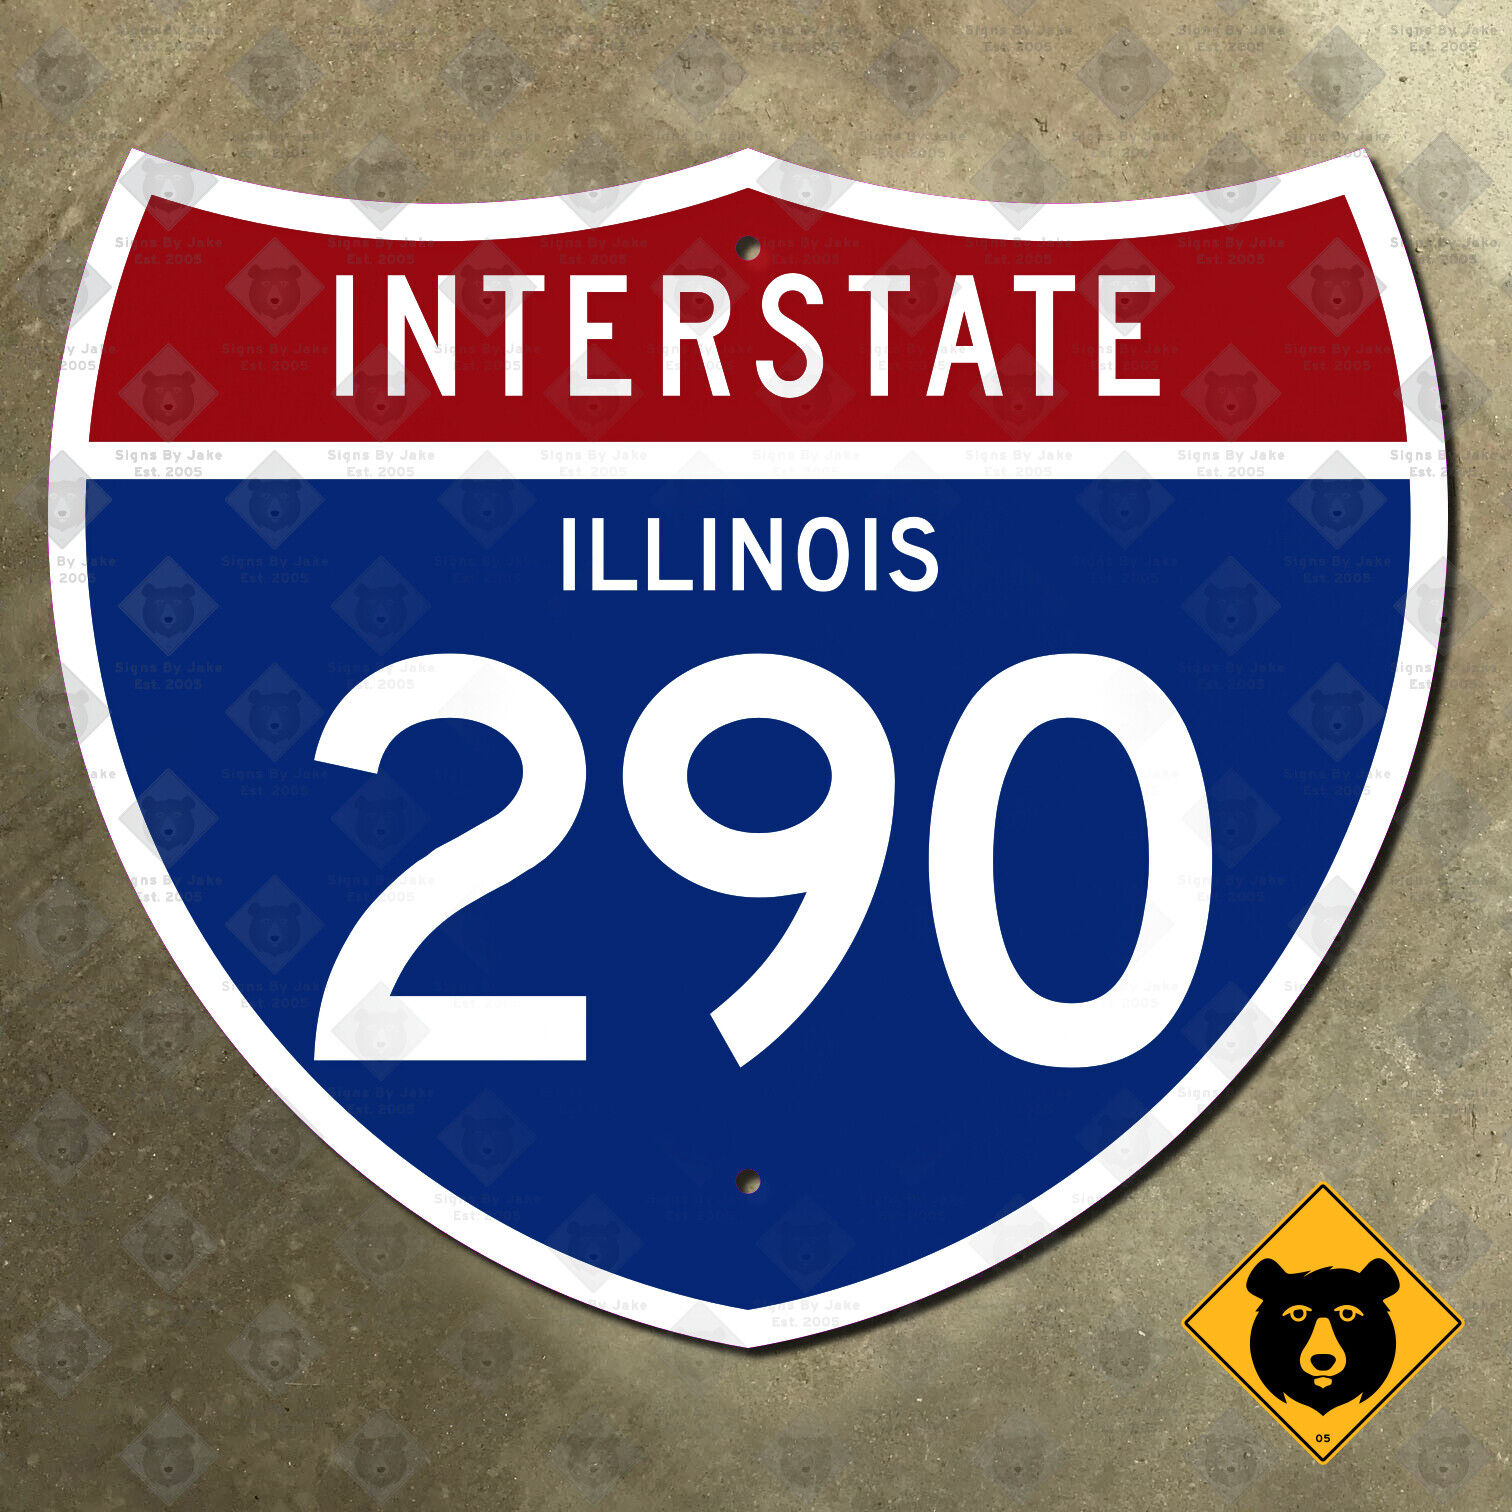 Illinois interstate 290 road sign highway marker Chicago Rolling Meadows 21x18